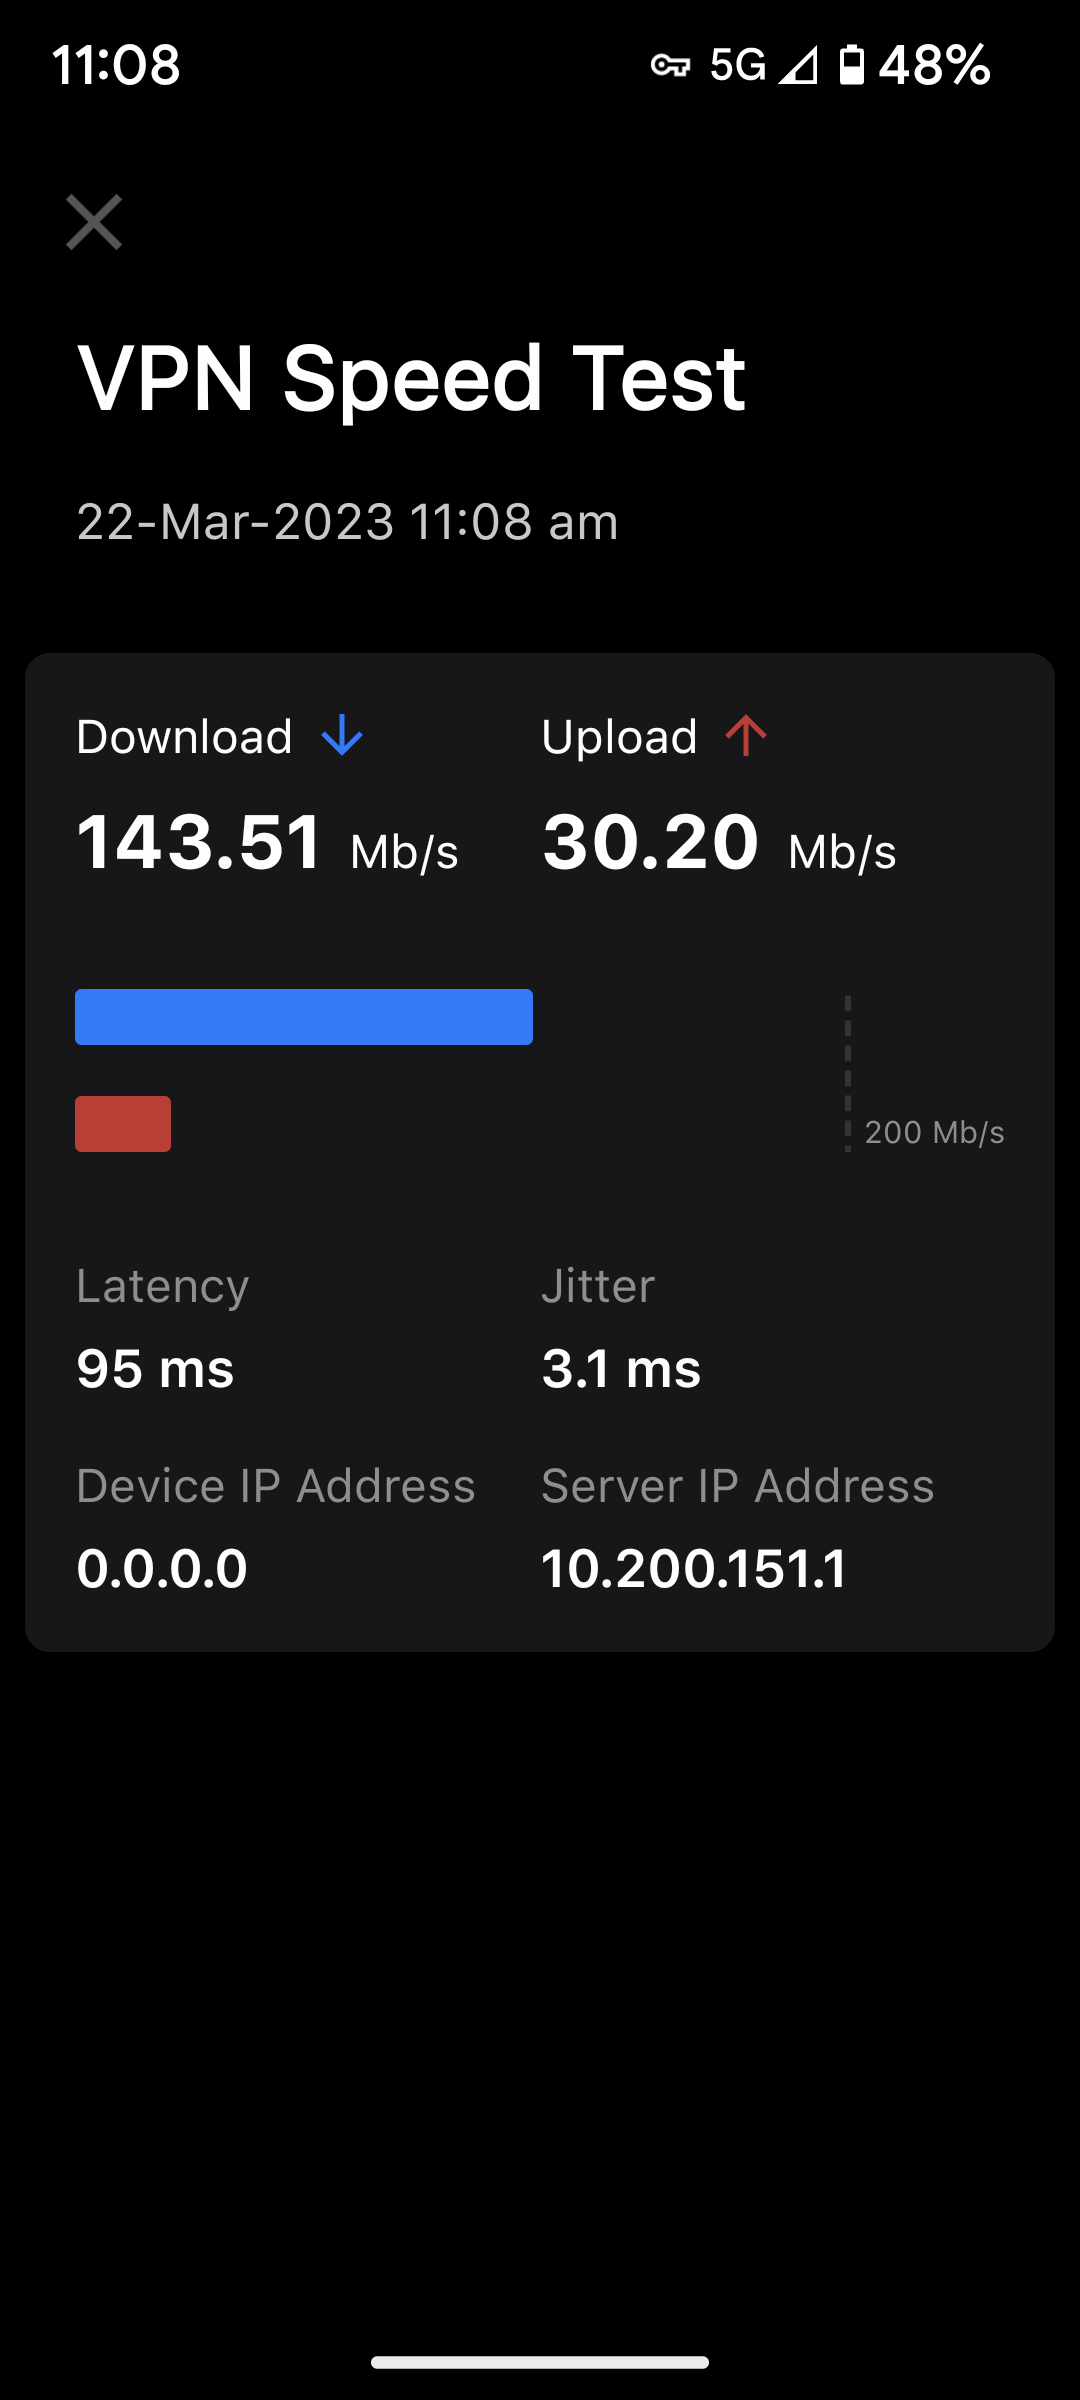 Test the speed of your VPN connection by using the same Speed Test used for LAN WiFi testing